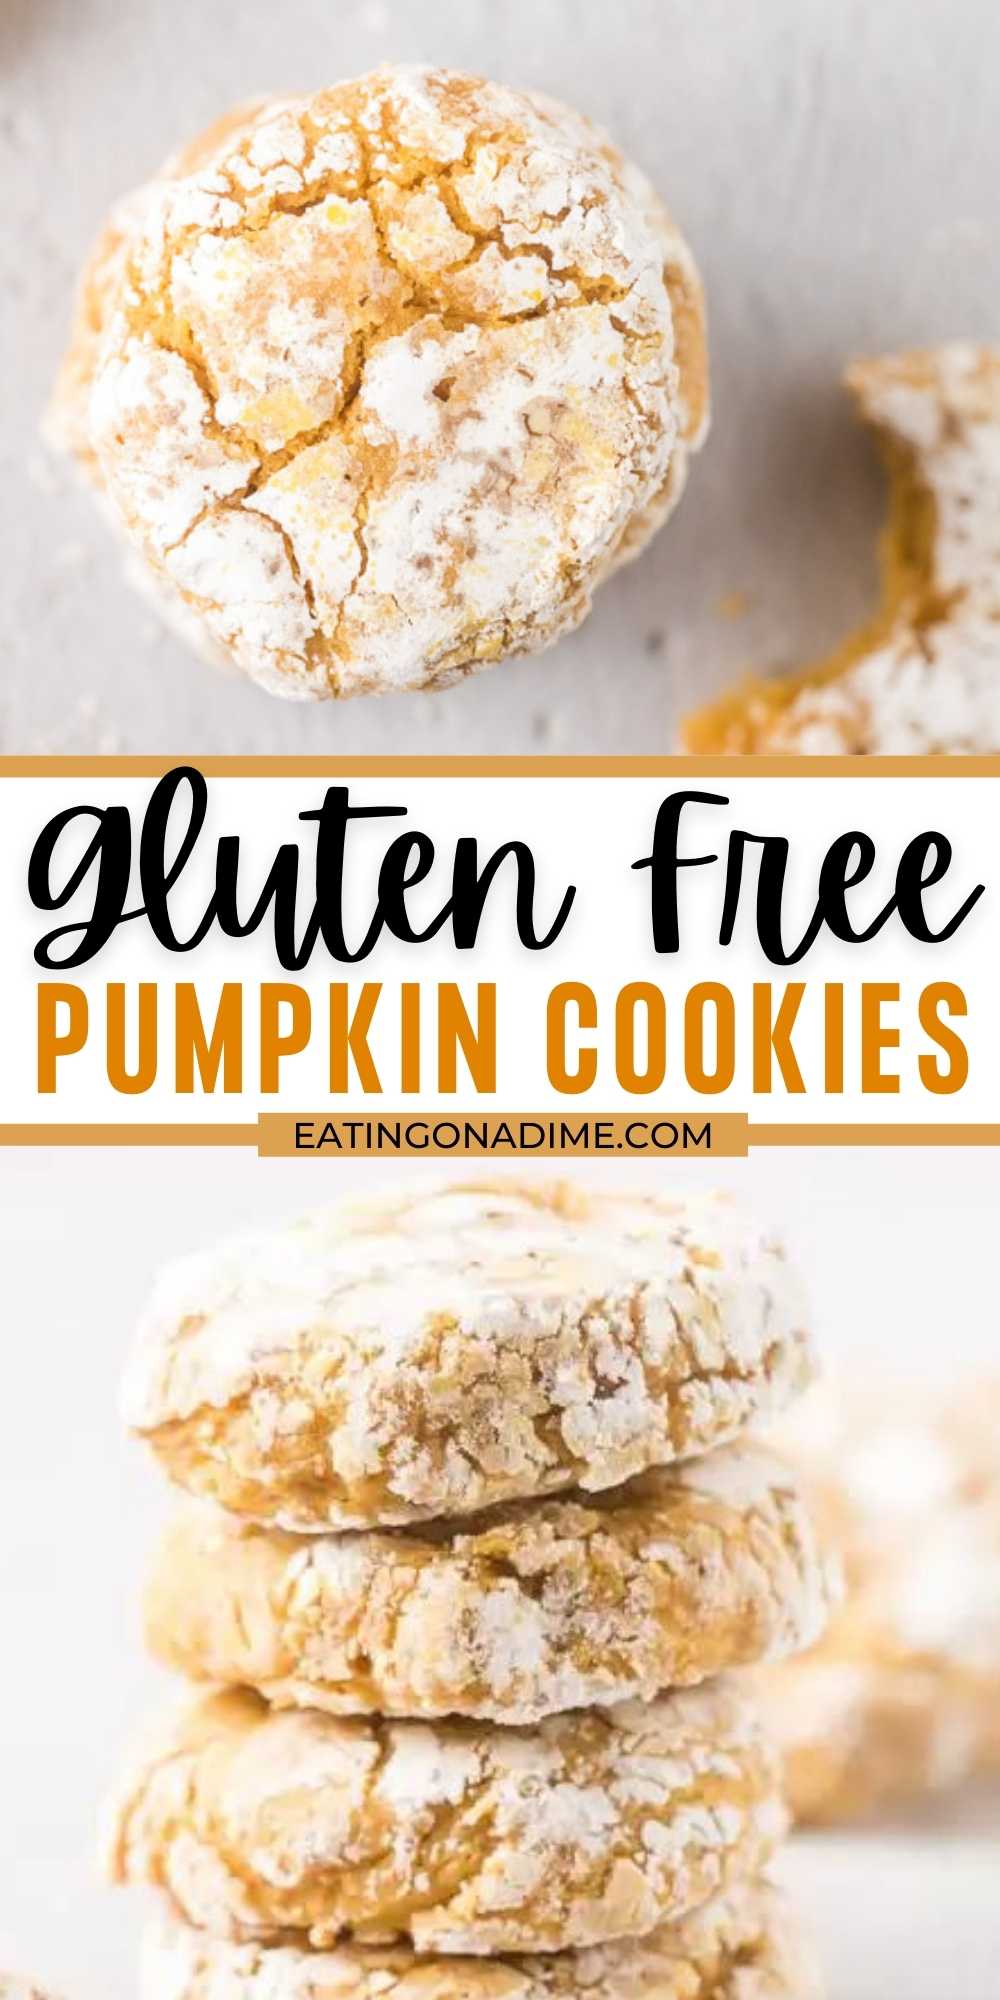 Get all the instructions here for gluten free pumpkin cookies recipe. They are so good that no one will notice it doesn't include gluten. So easy! These cookies are chewy, moist and the best fall gluten free dessert recipe. #eatingonadime #cookierecipes #glutenfreerecipes #pumpkinrecips 
